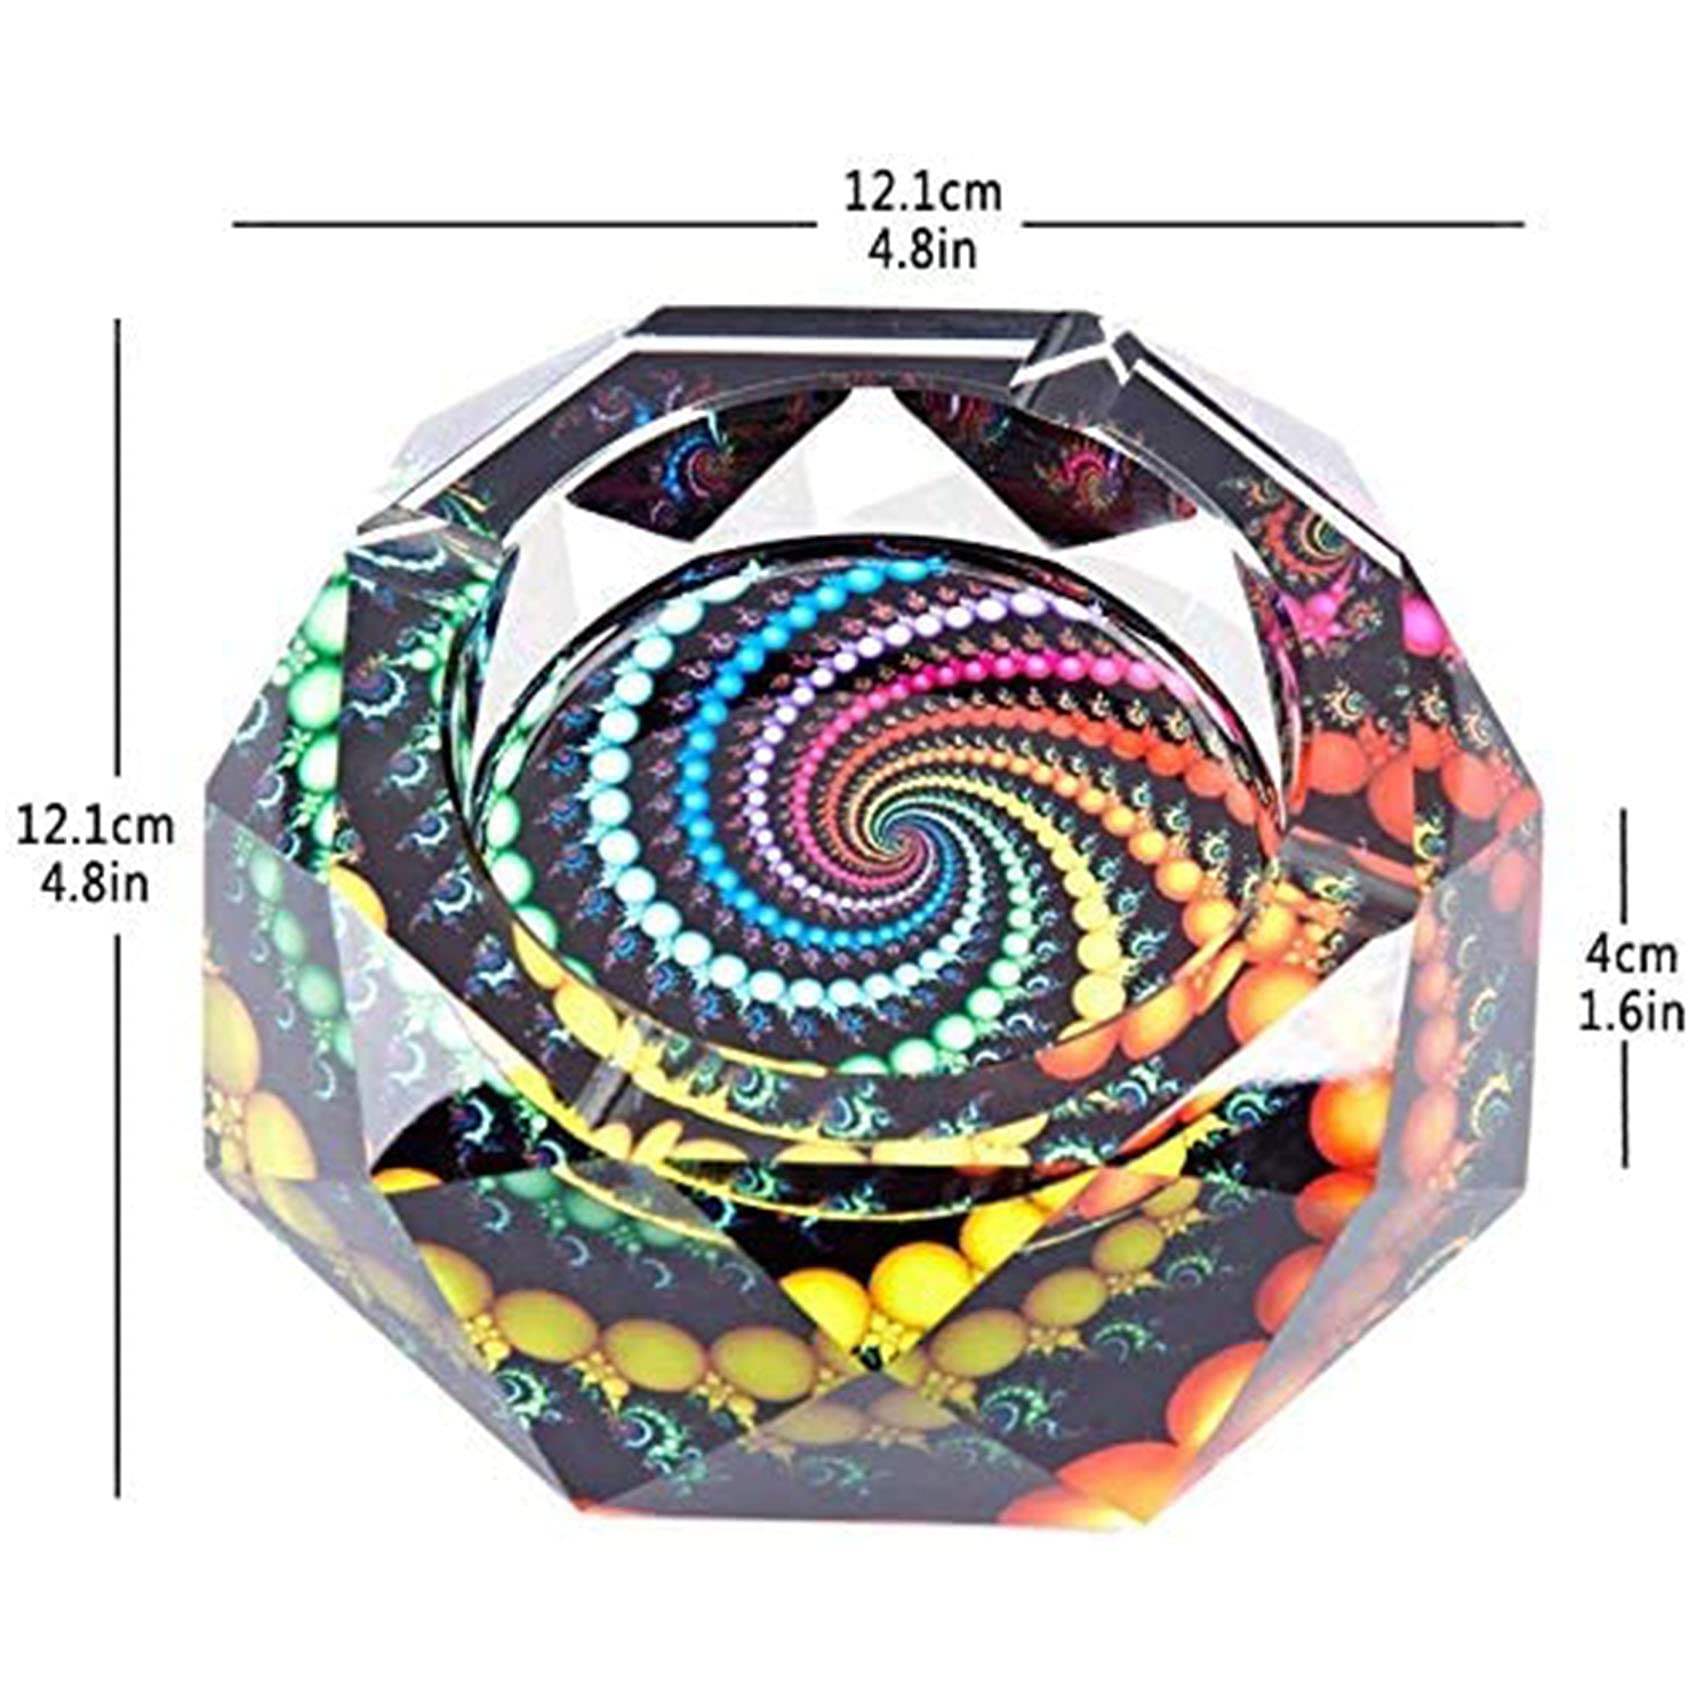 Cigarette Ashtray Ash Holder Case-Creative Crystal Cigarette Ashtray for Indoor or Outdoor Use Ash Holder for Smokers Desktop Smoking Ash Tray for Home Office Decoration (Multicolor)